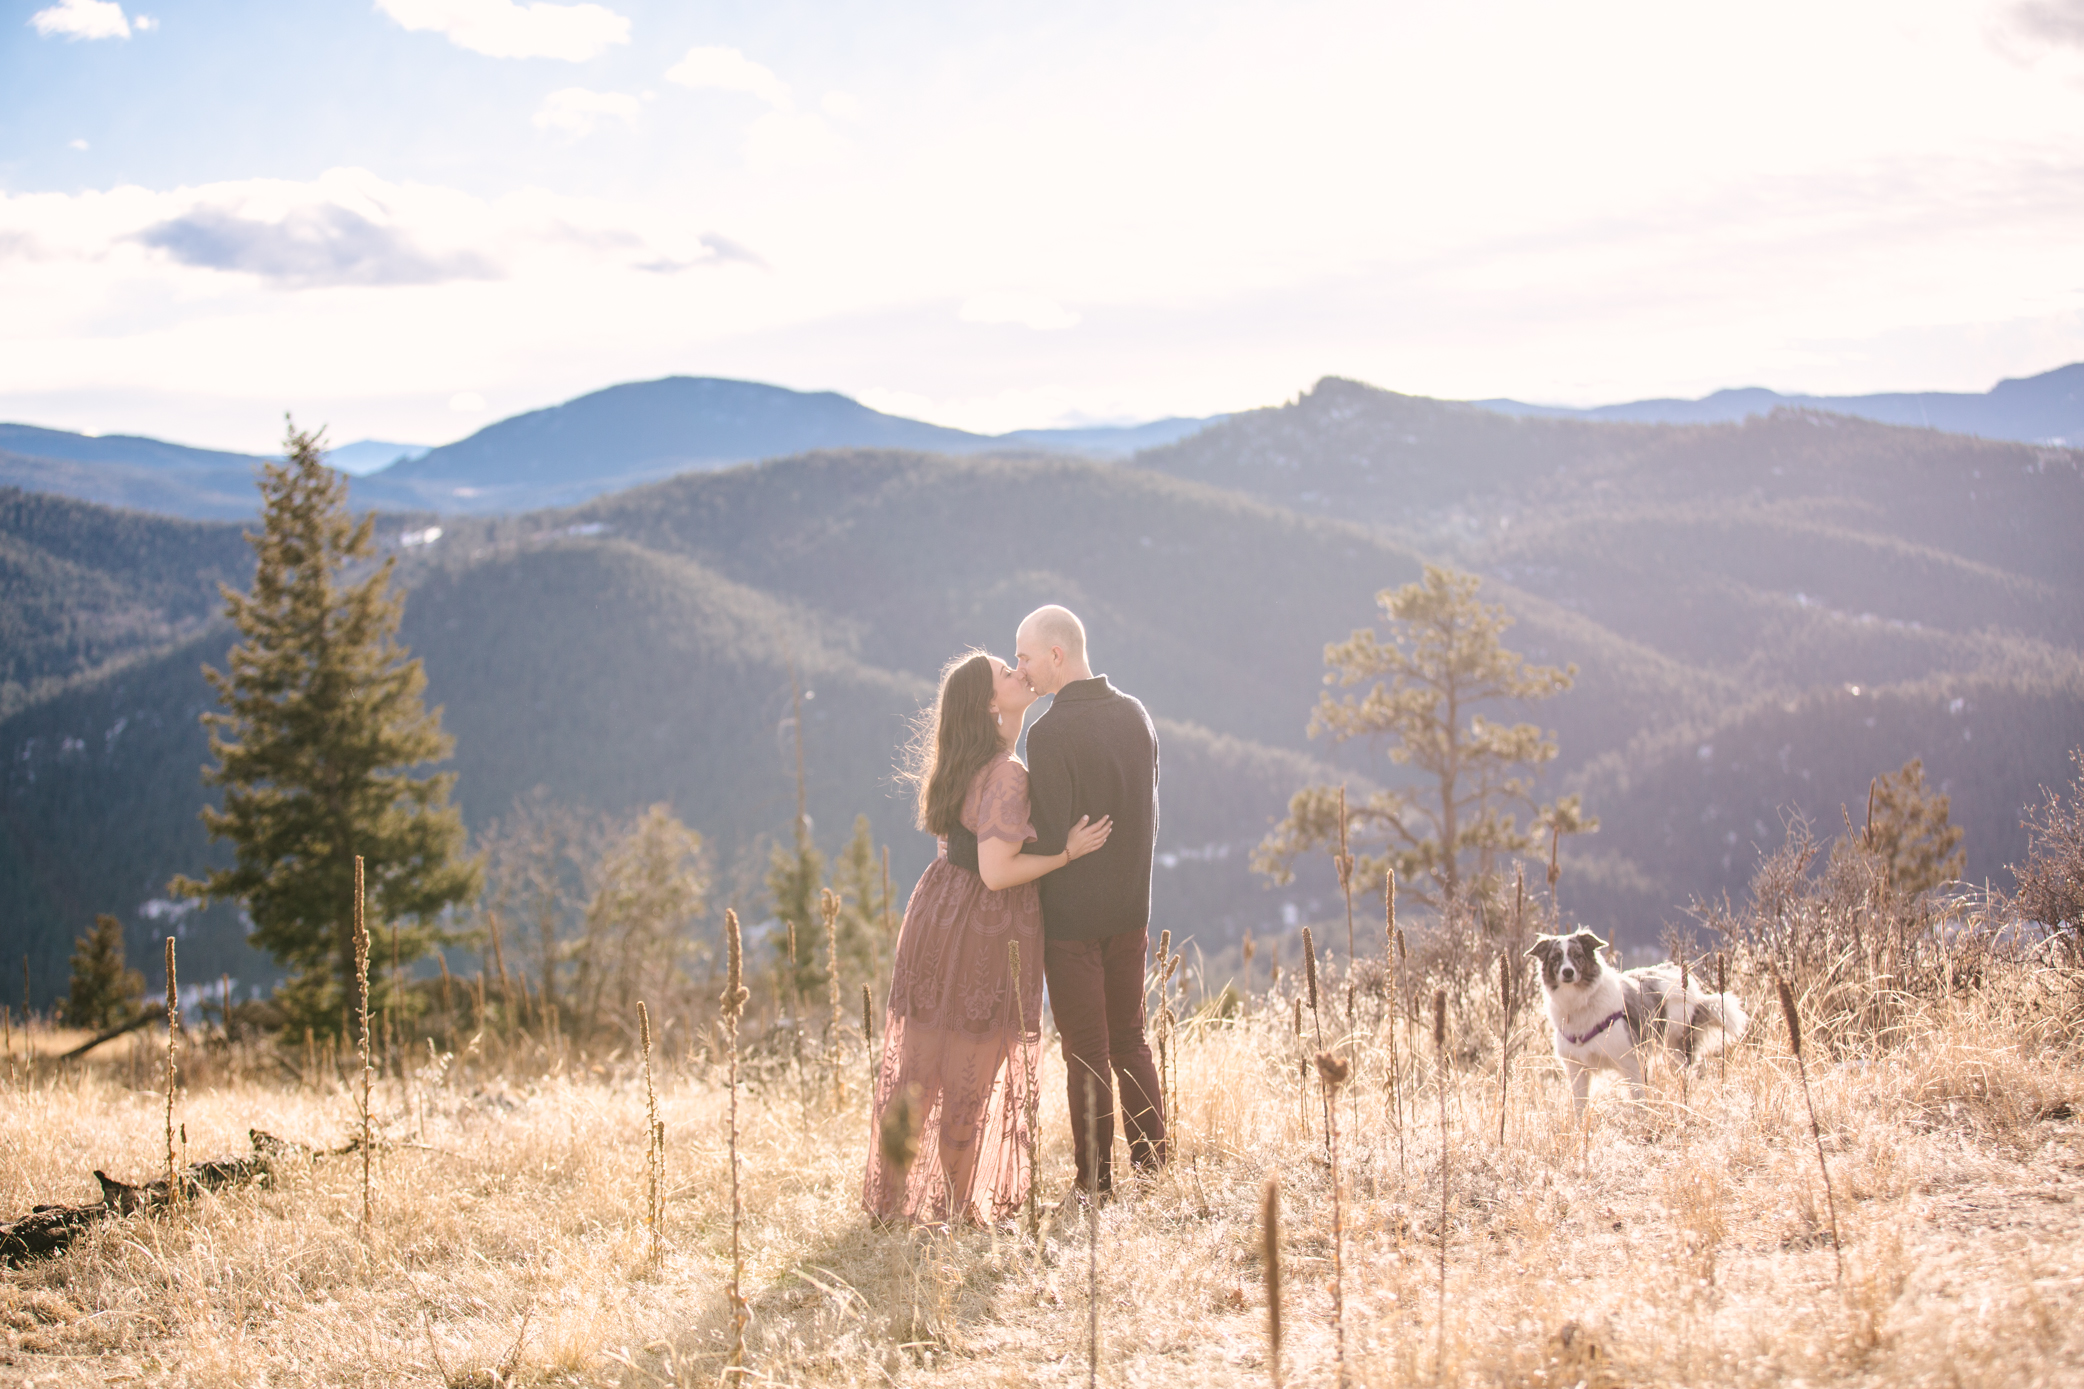 Tips for choosing the location for your engagement pictures.